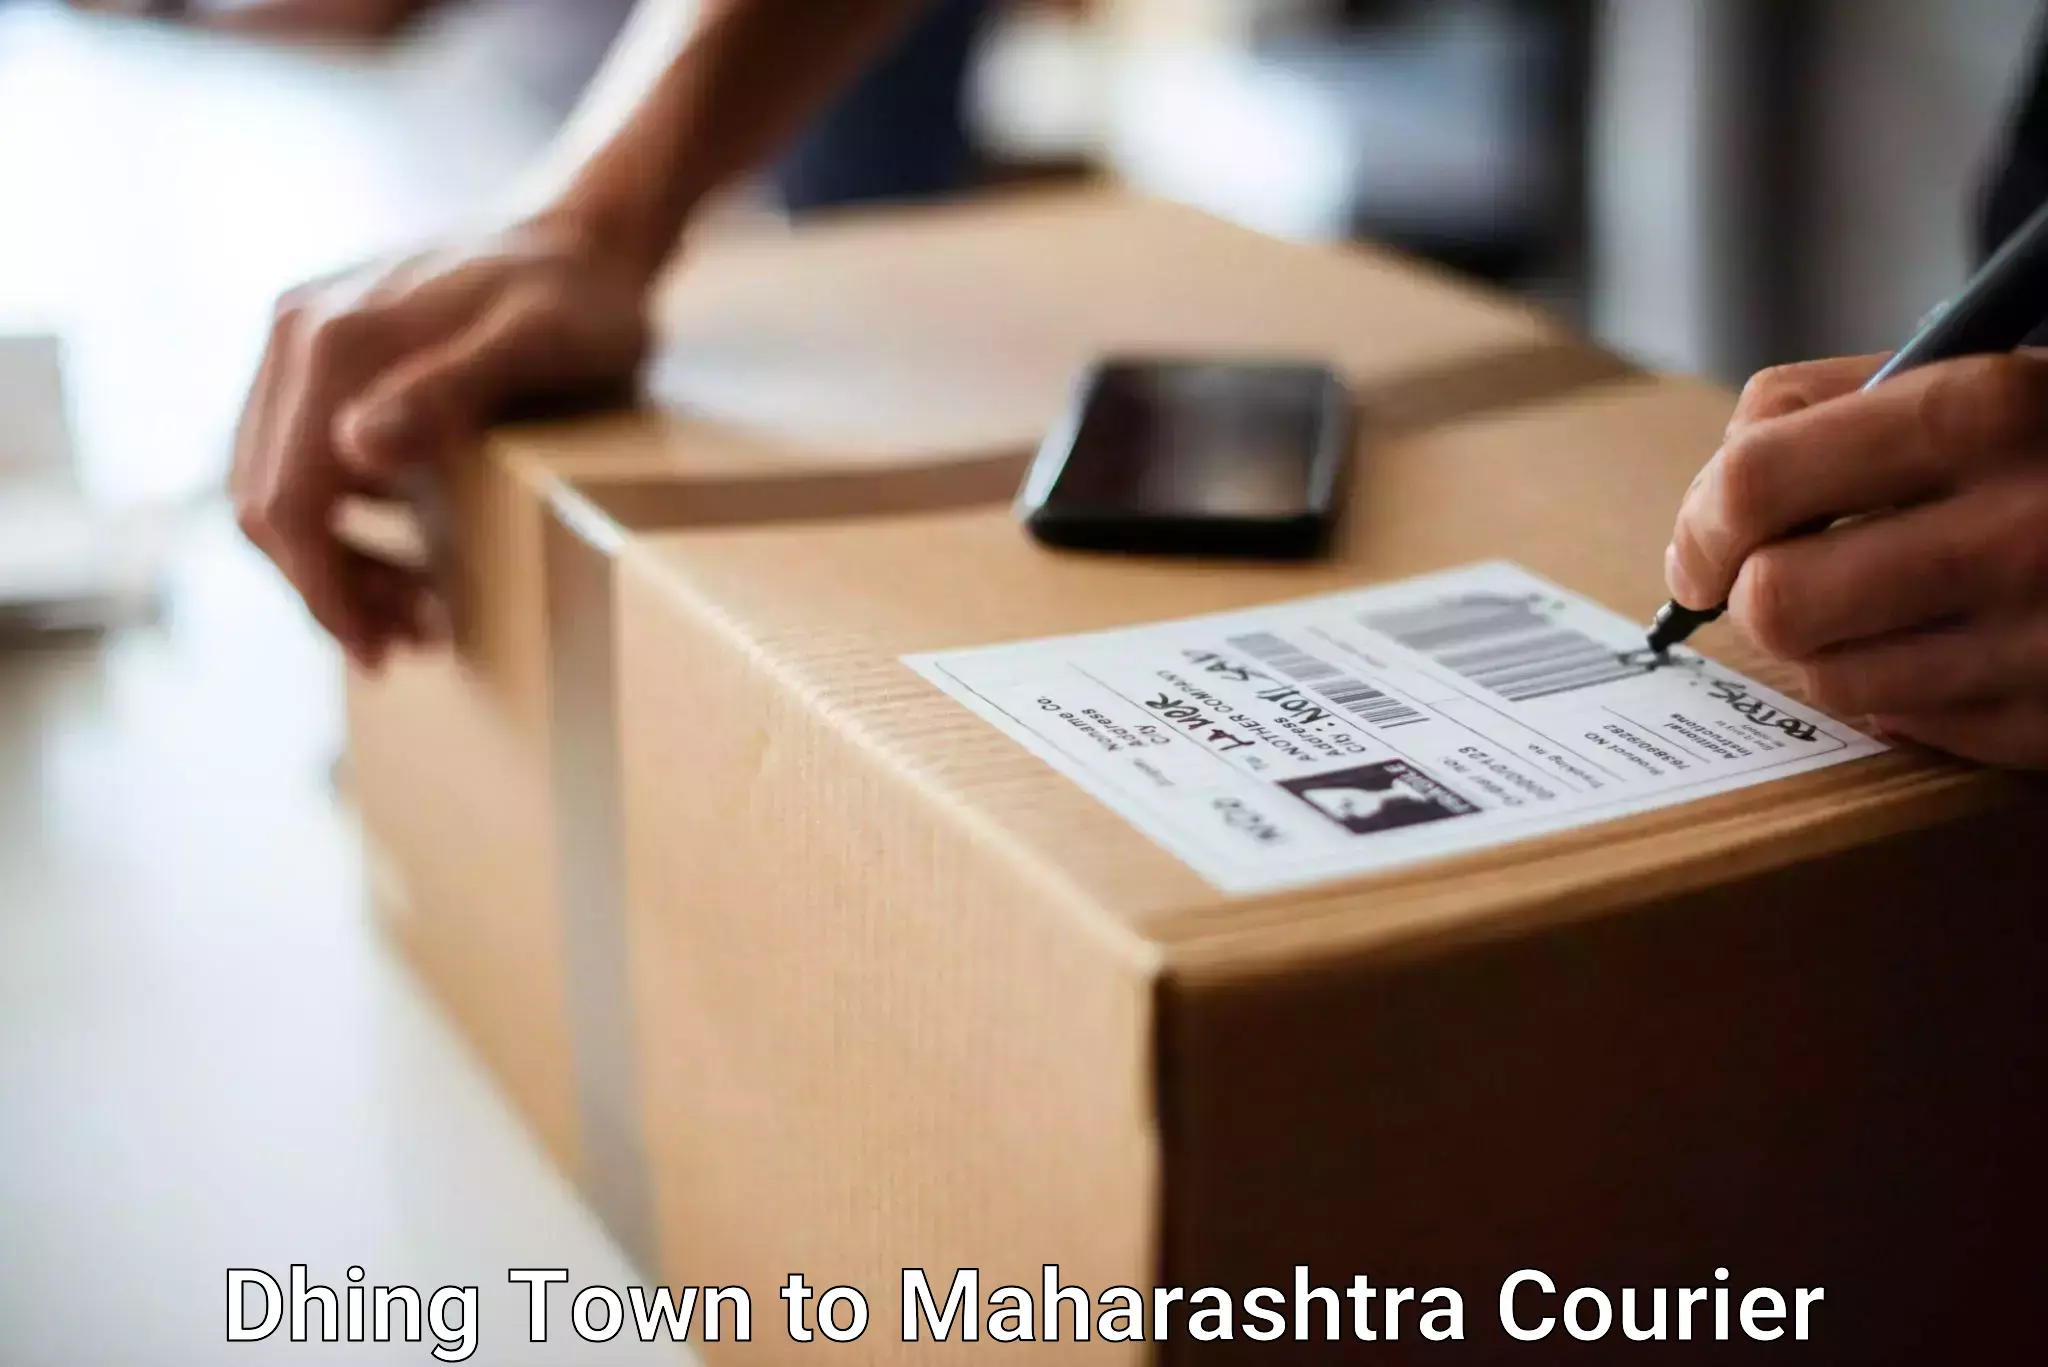 Baggage transport network Dhing Town to Maharashtra